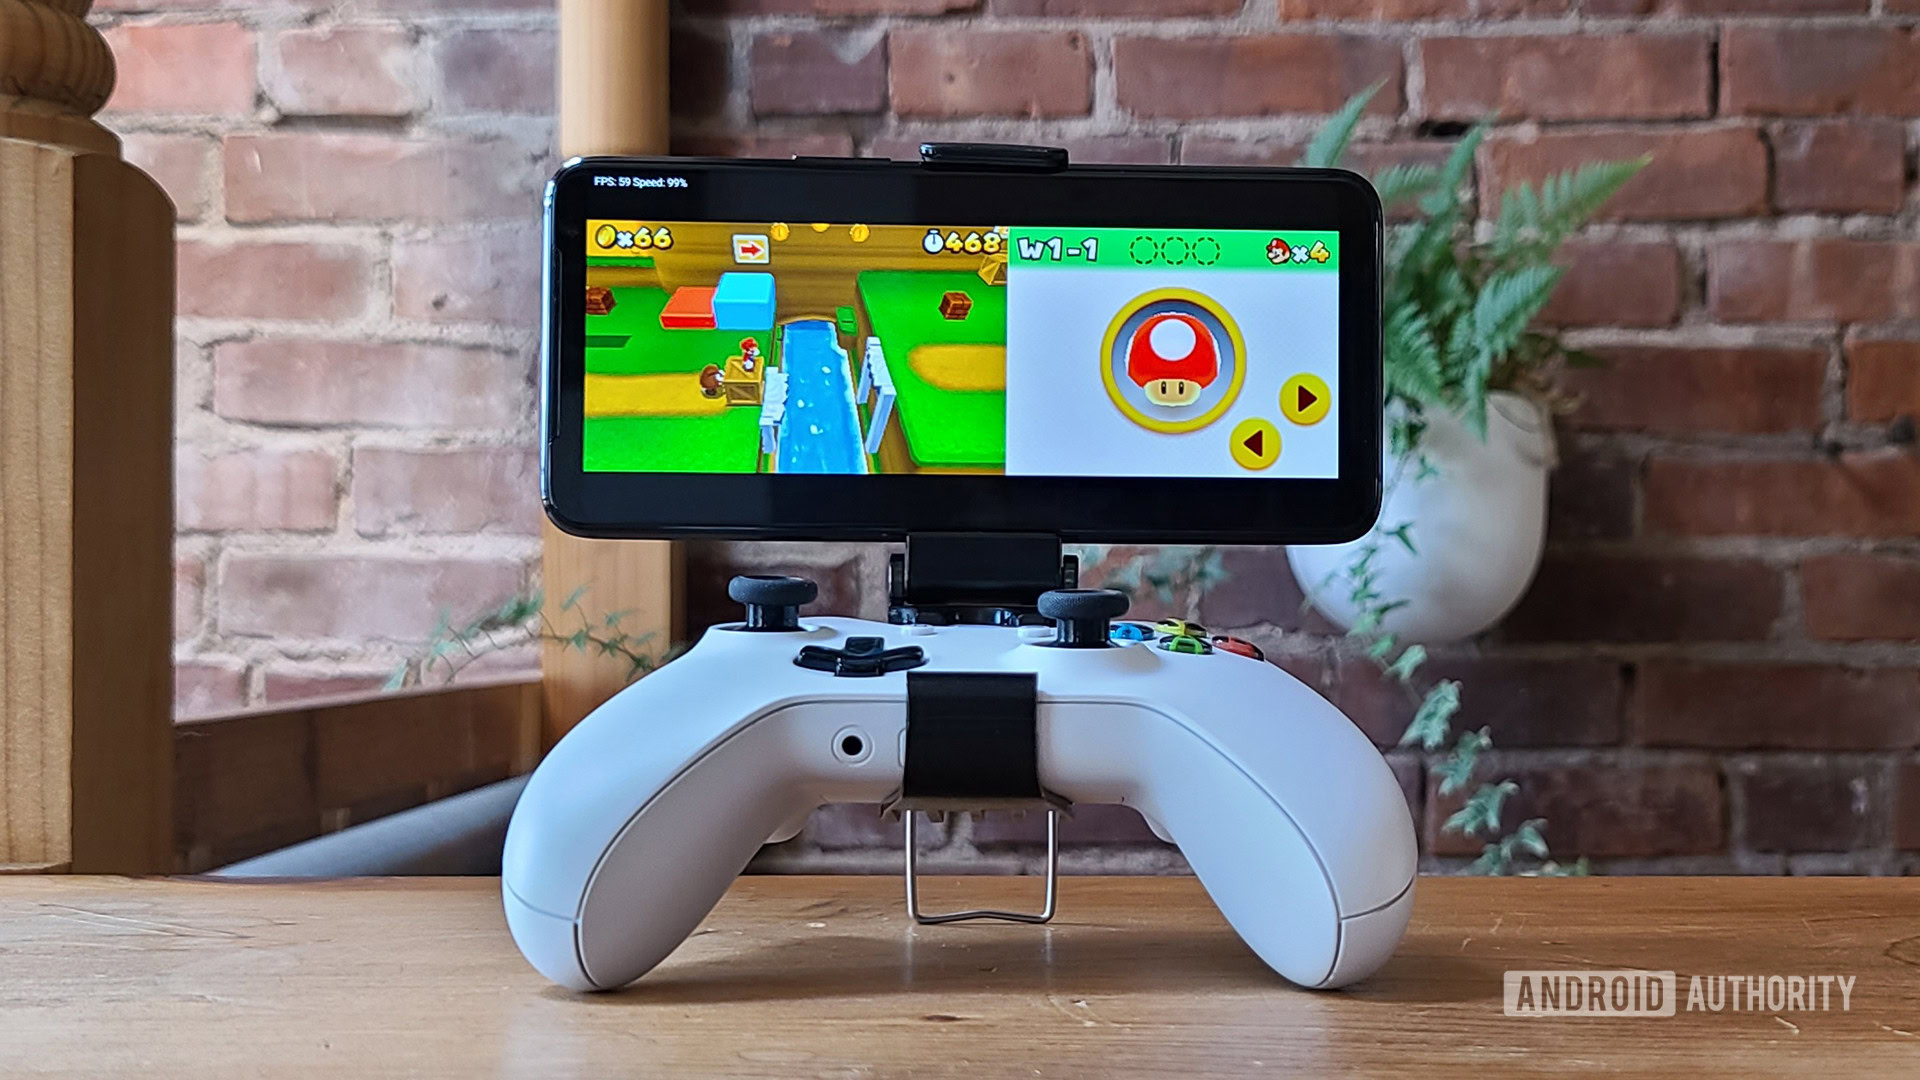 Citra officially arrives for Android as the first mobile Nintendo